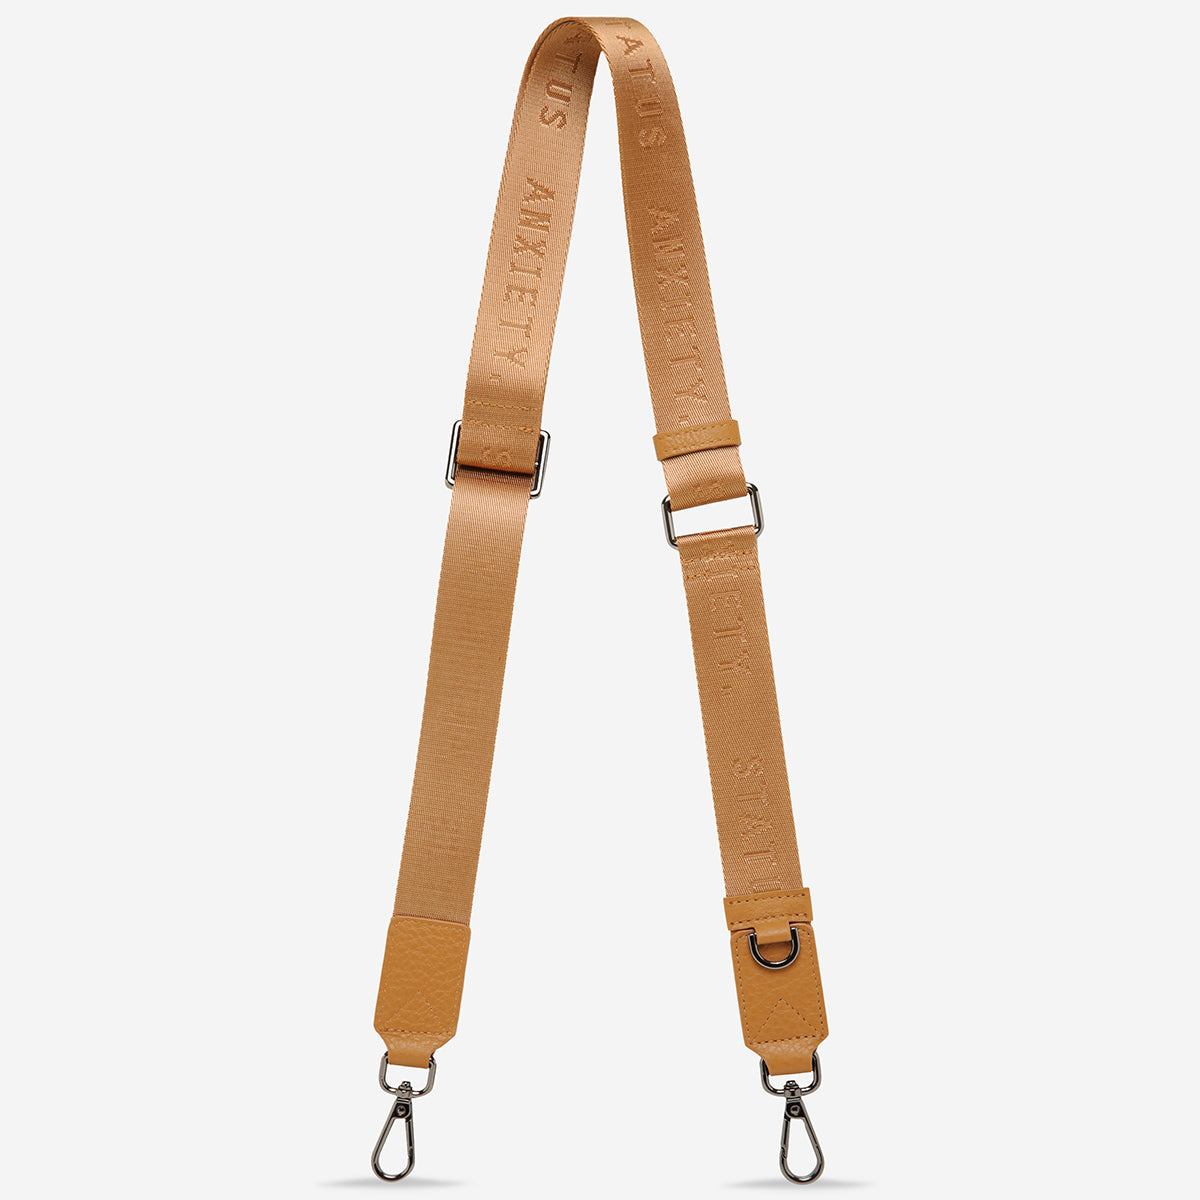 Status Anxiety Lucky Escape Webbed Strap Tan